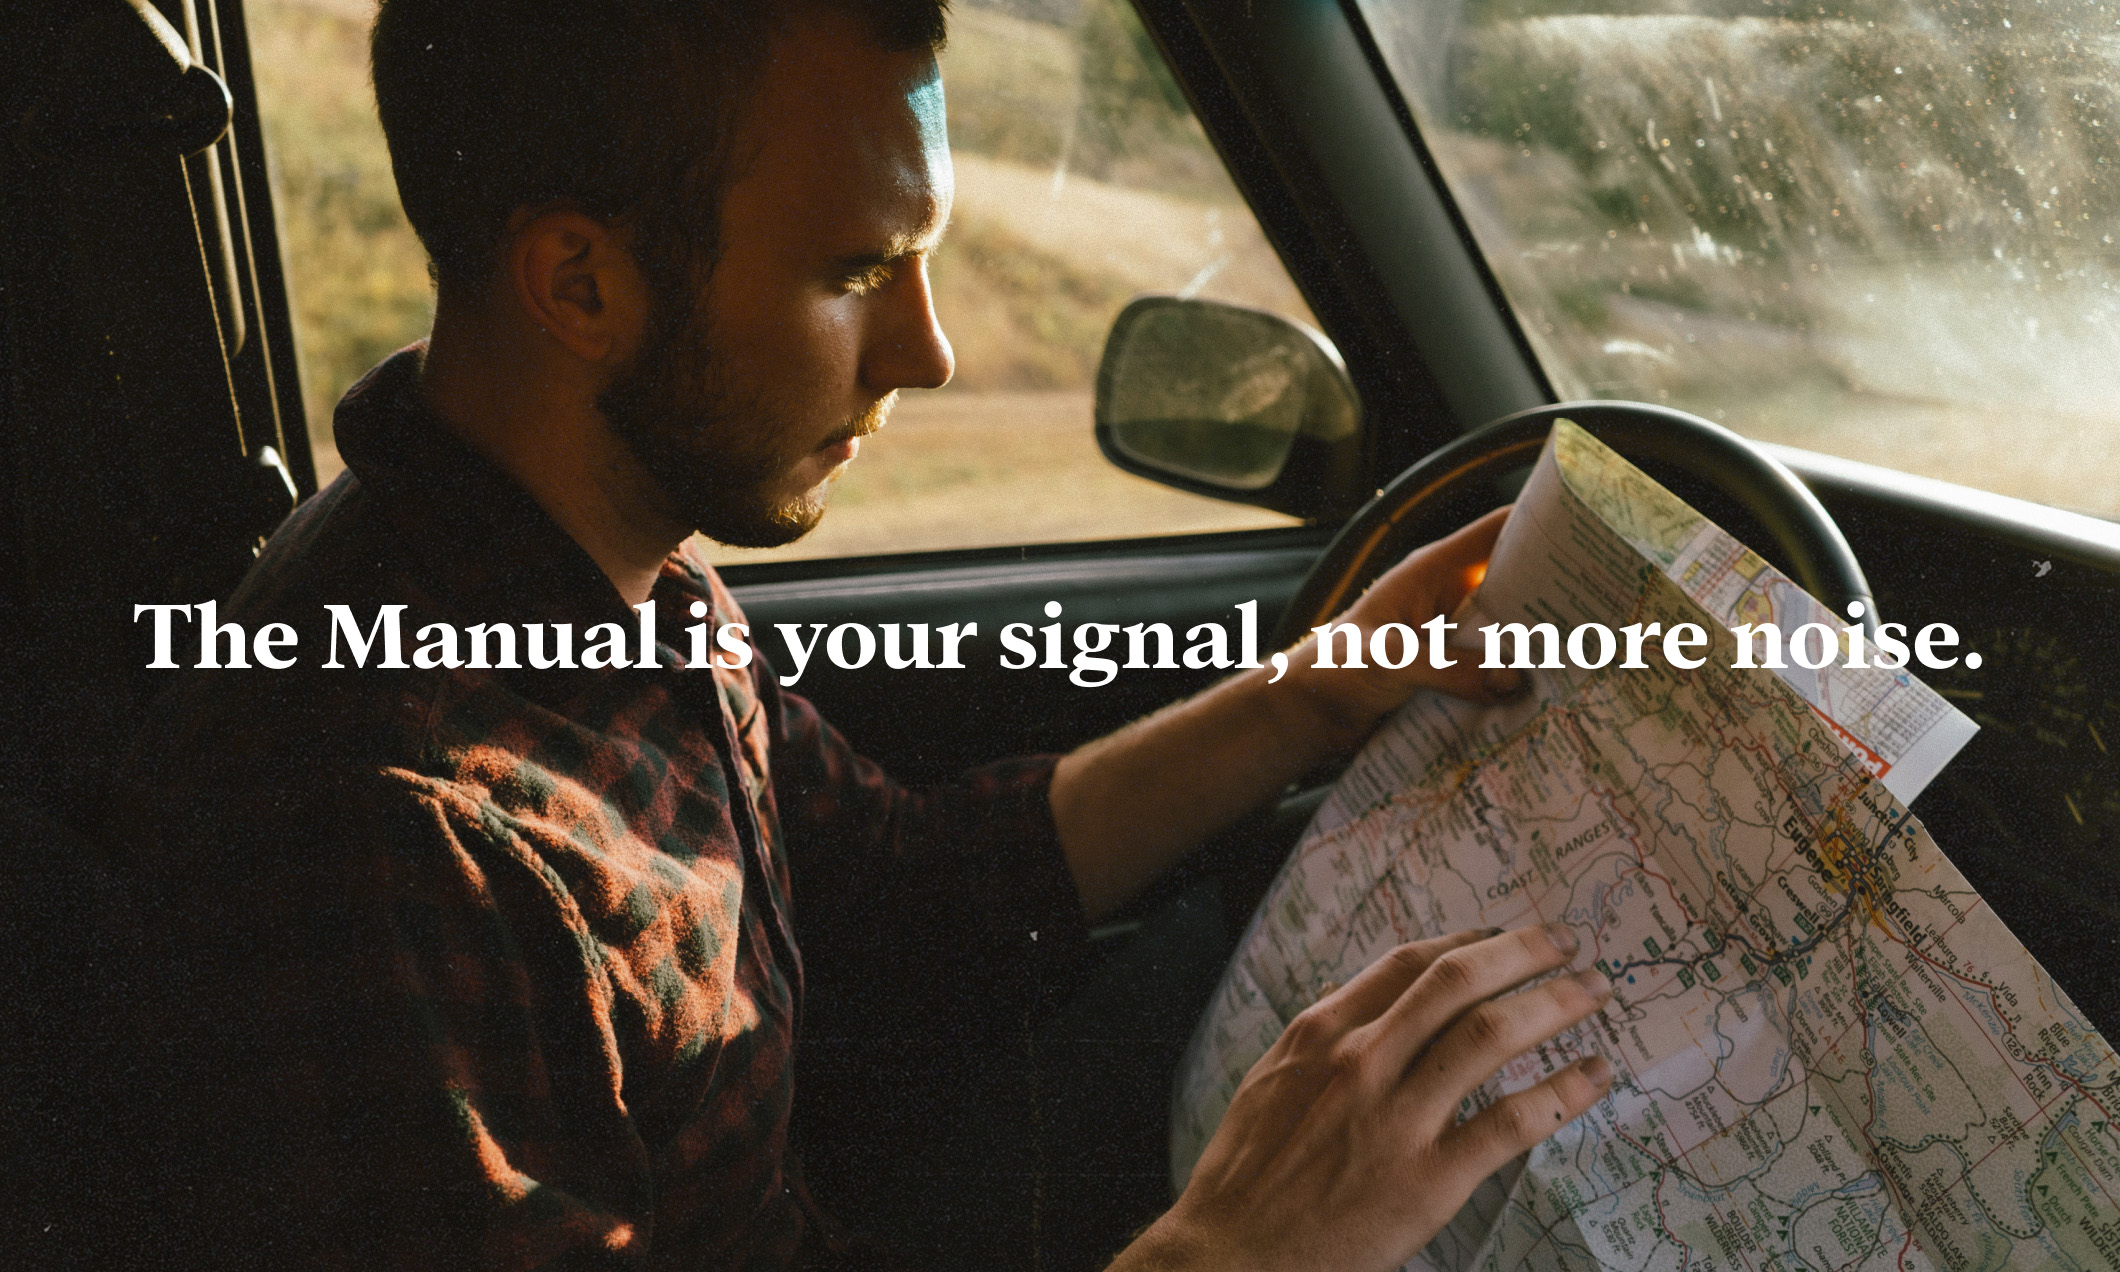 The Manual is your signal, not more noise.